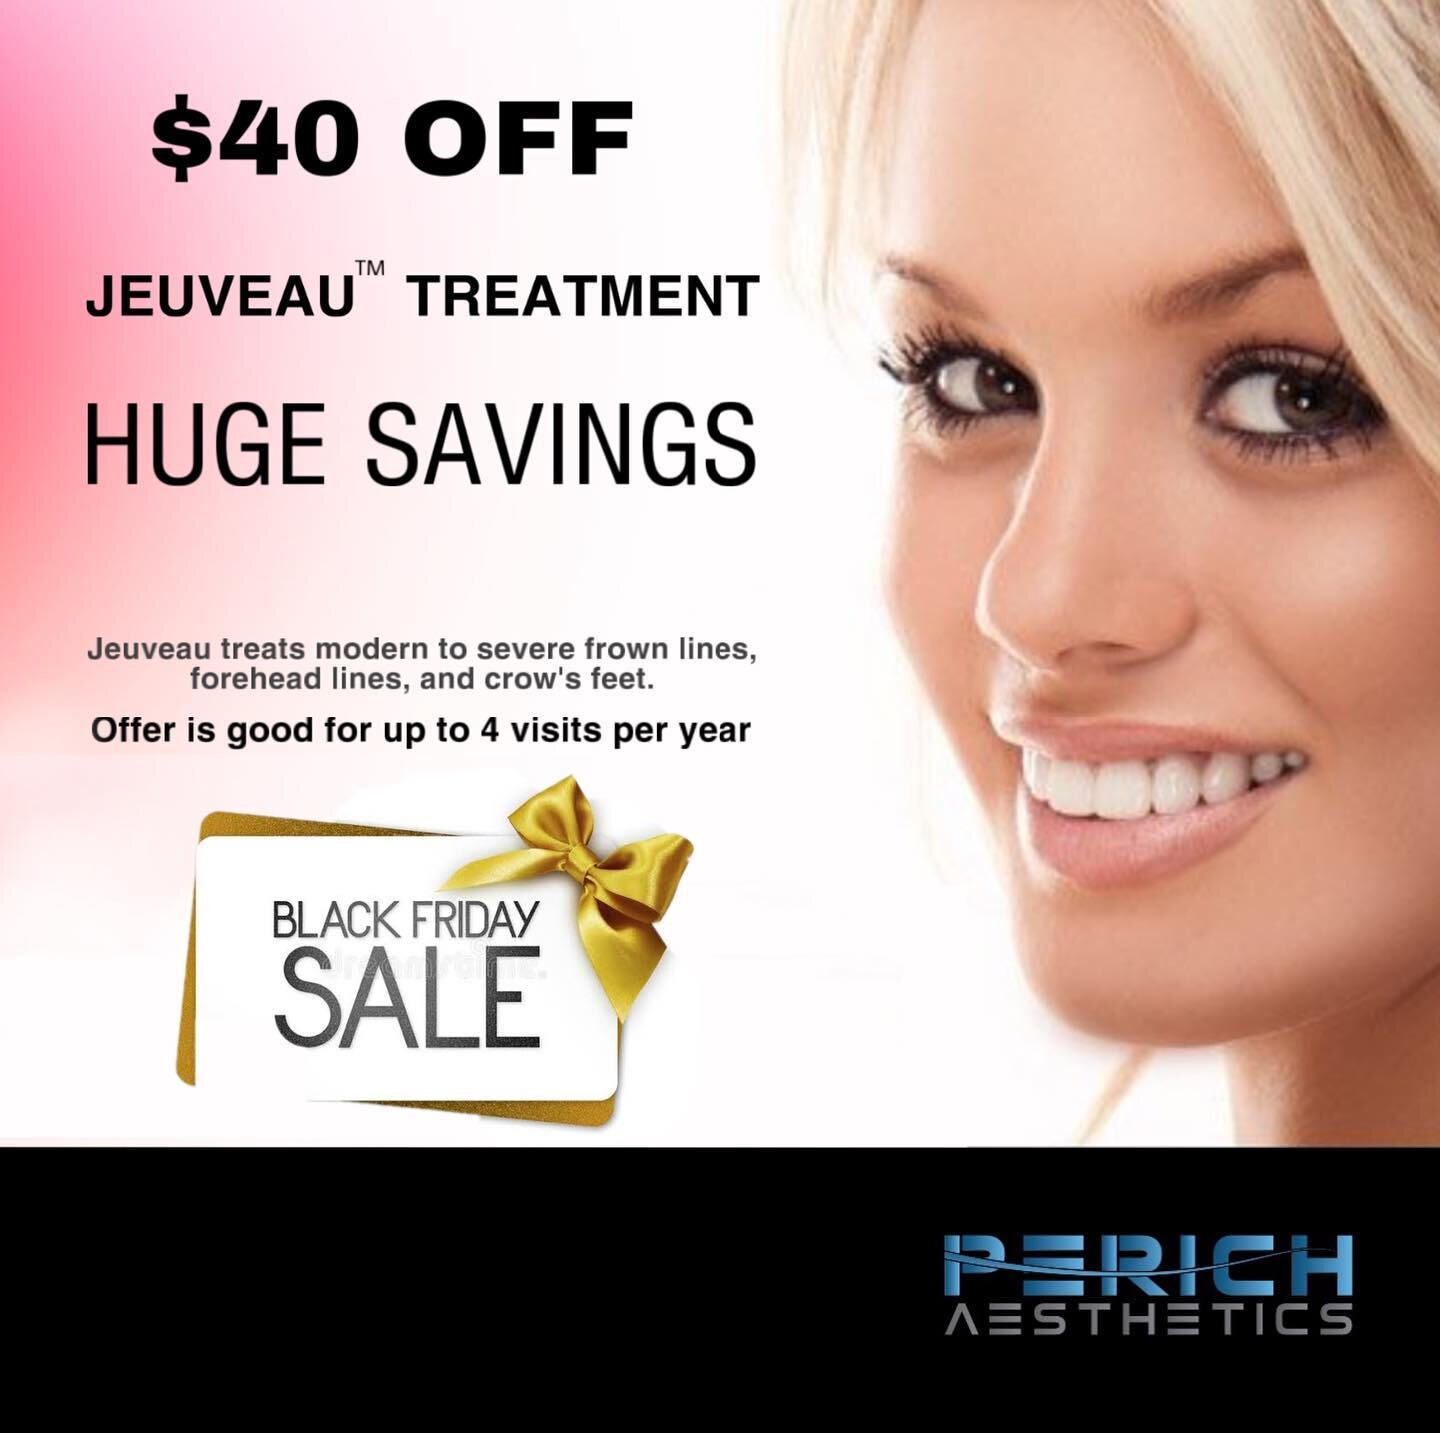 Best Black Friday Deals! Check it out ! www.perichaesthetics.com
Call or text 727-777-2640

Get Jeuveau (works like Botox) at Perich Aesthetics. Improve frown lines, forehead lines and crow&rsquo;s feet around the eyes. 

🖤Cosmetic procedures, medic